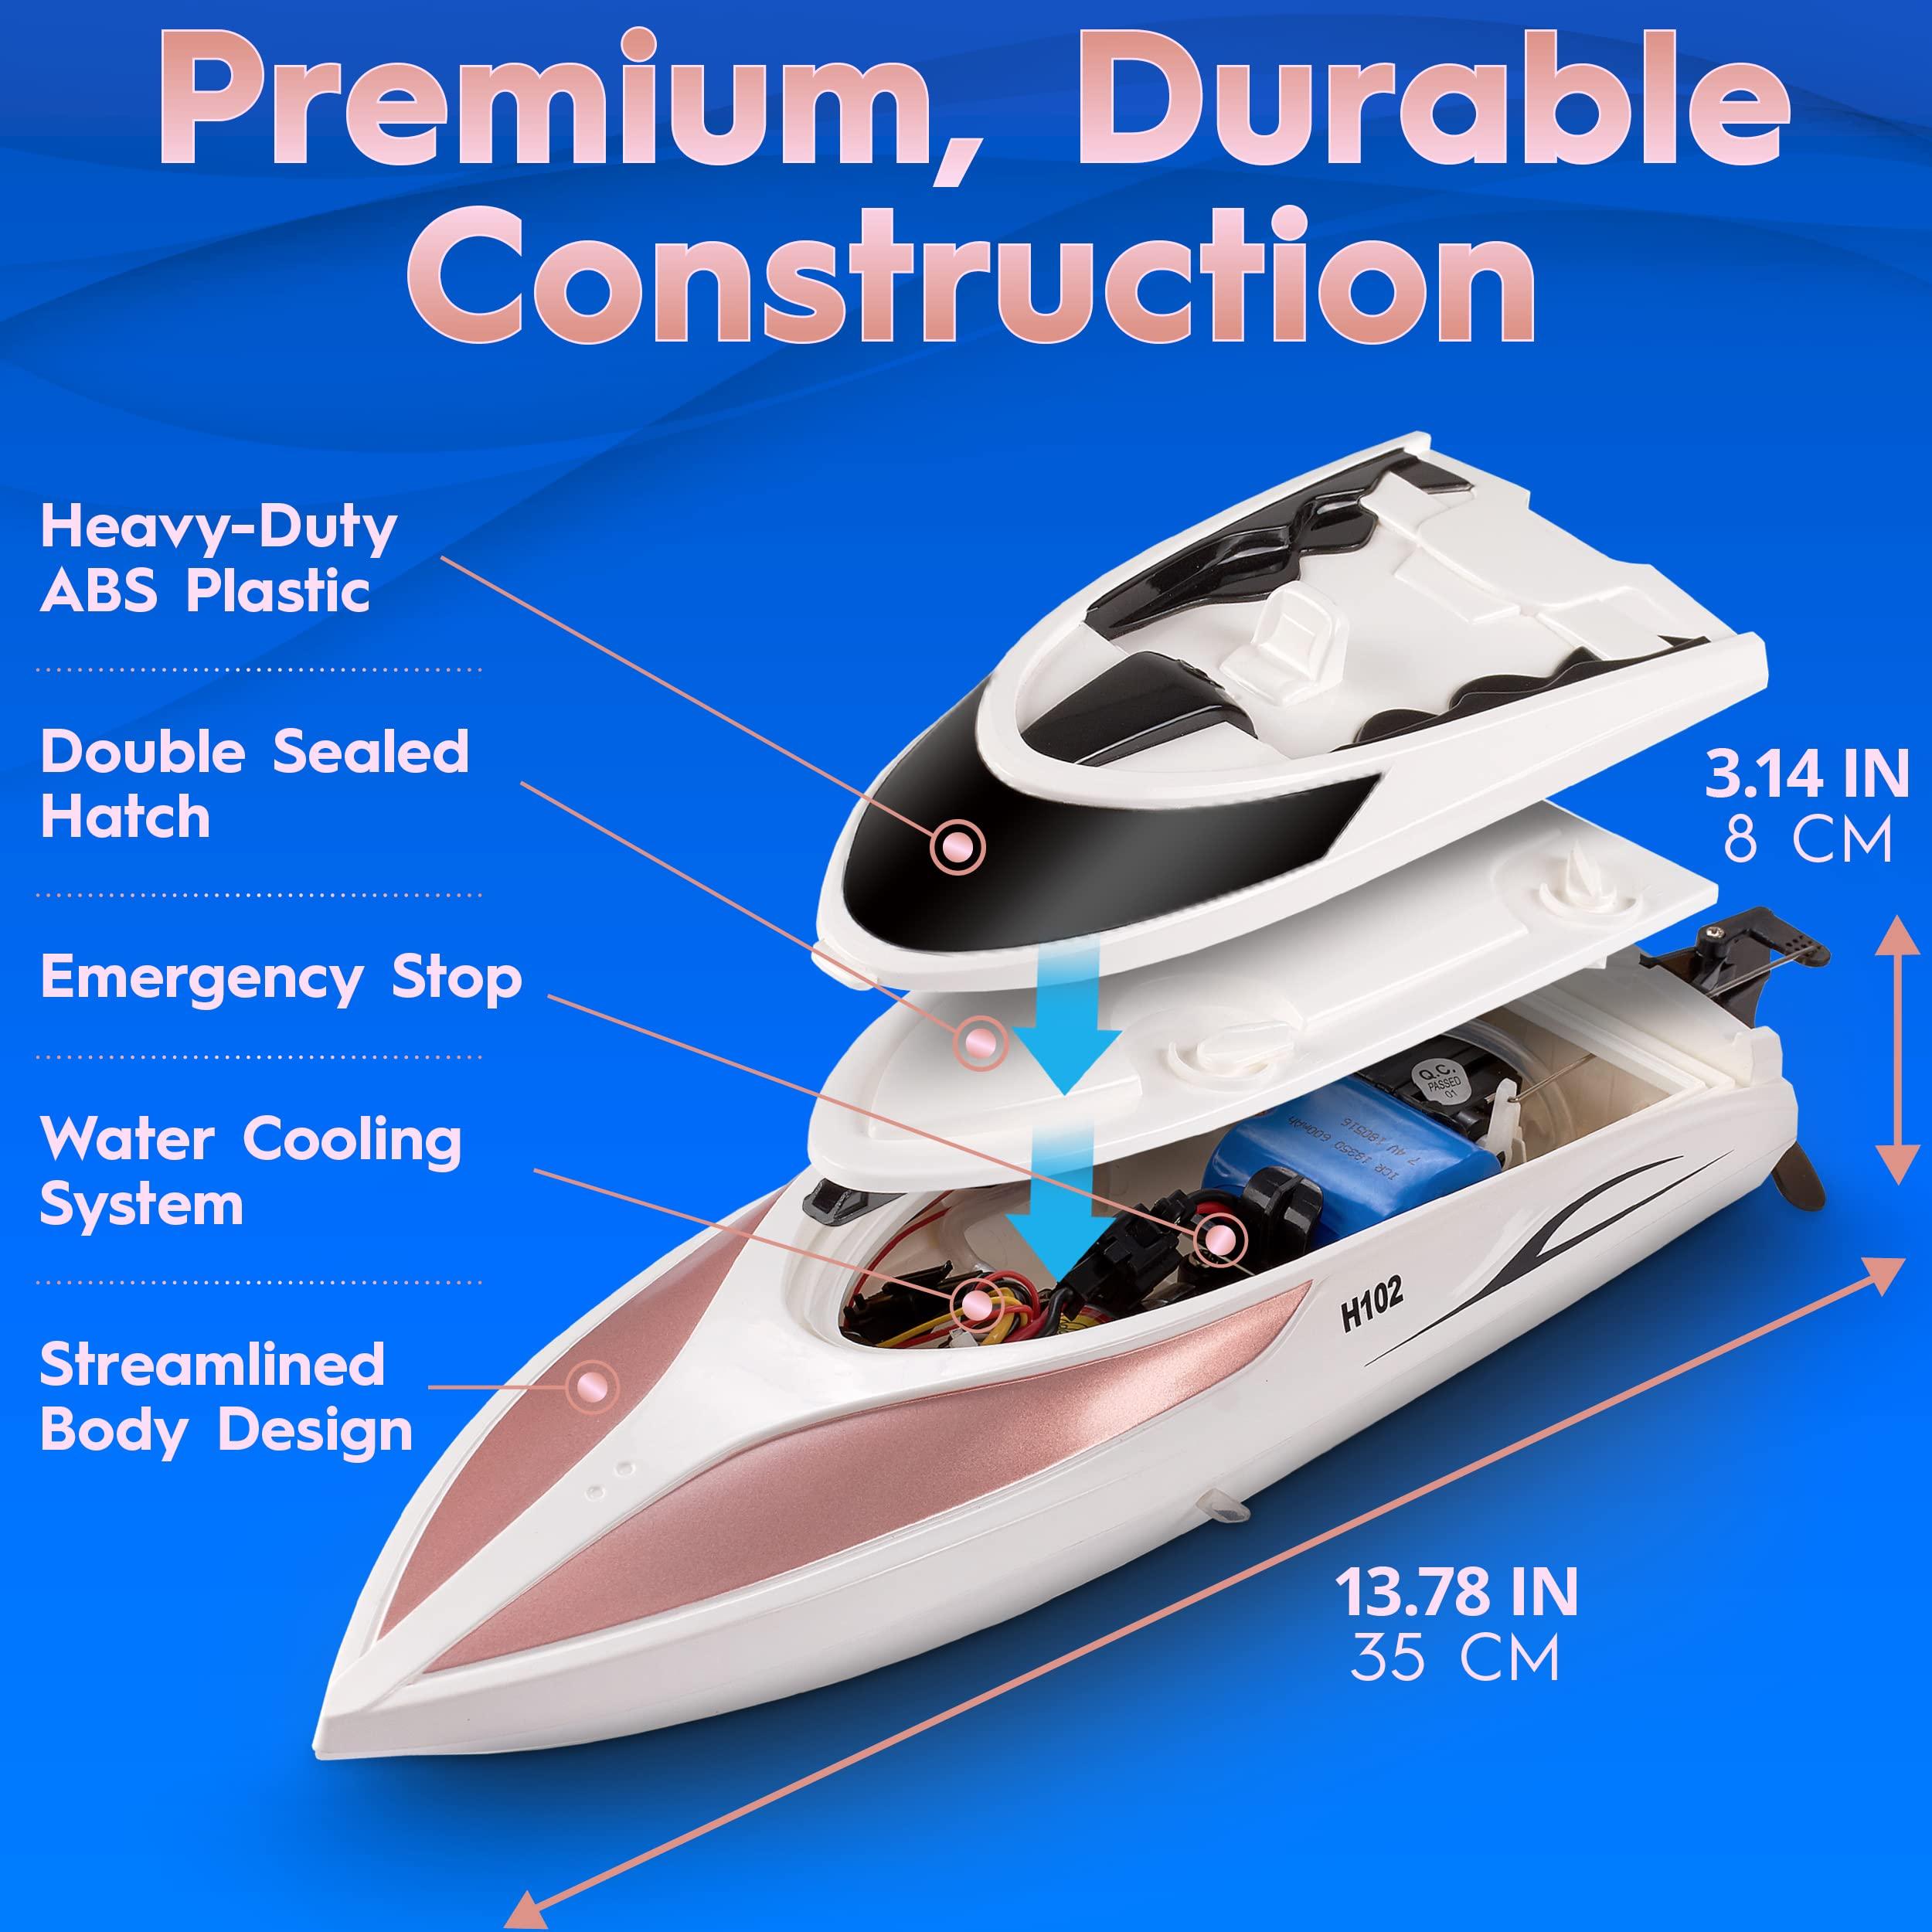 Ebt02 Rc Boat: Maintain and Upgrade Your ebt02 RC Boat for Optimal Performance